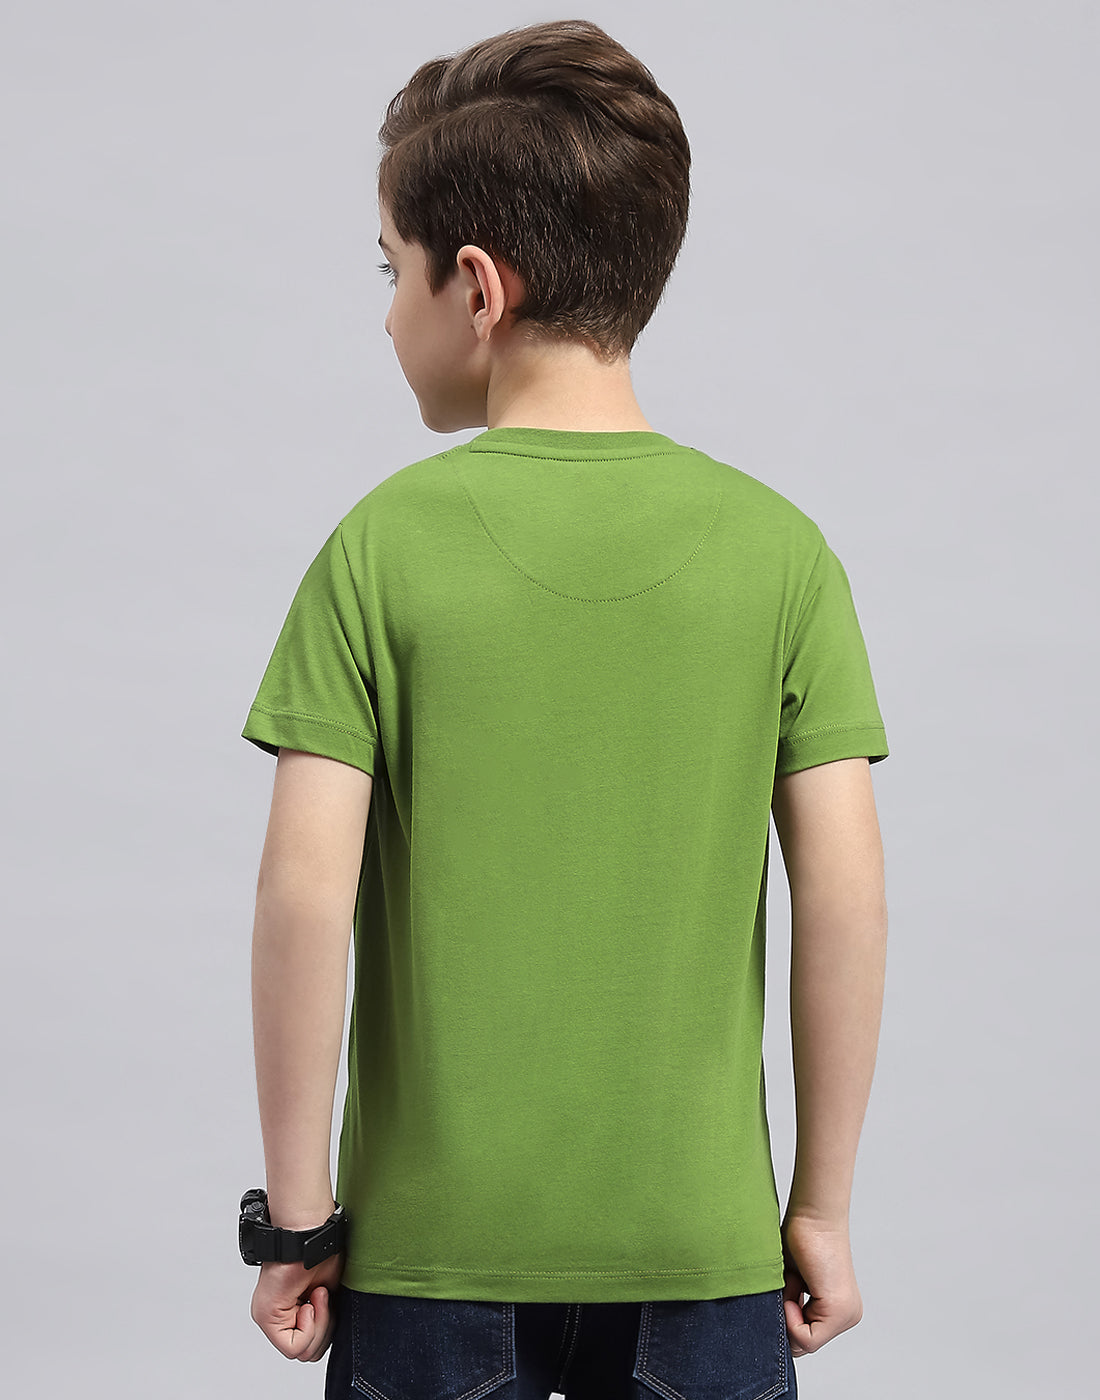 Boys Printed Round Neck Half Sleeve T-Shirt (Pack of 3)